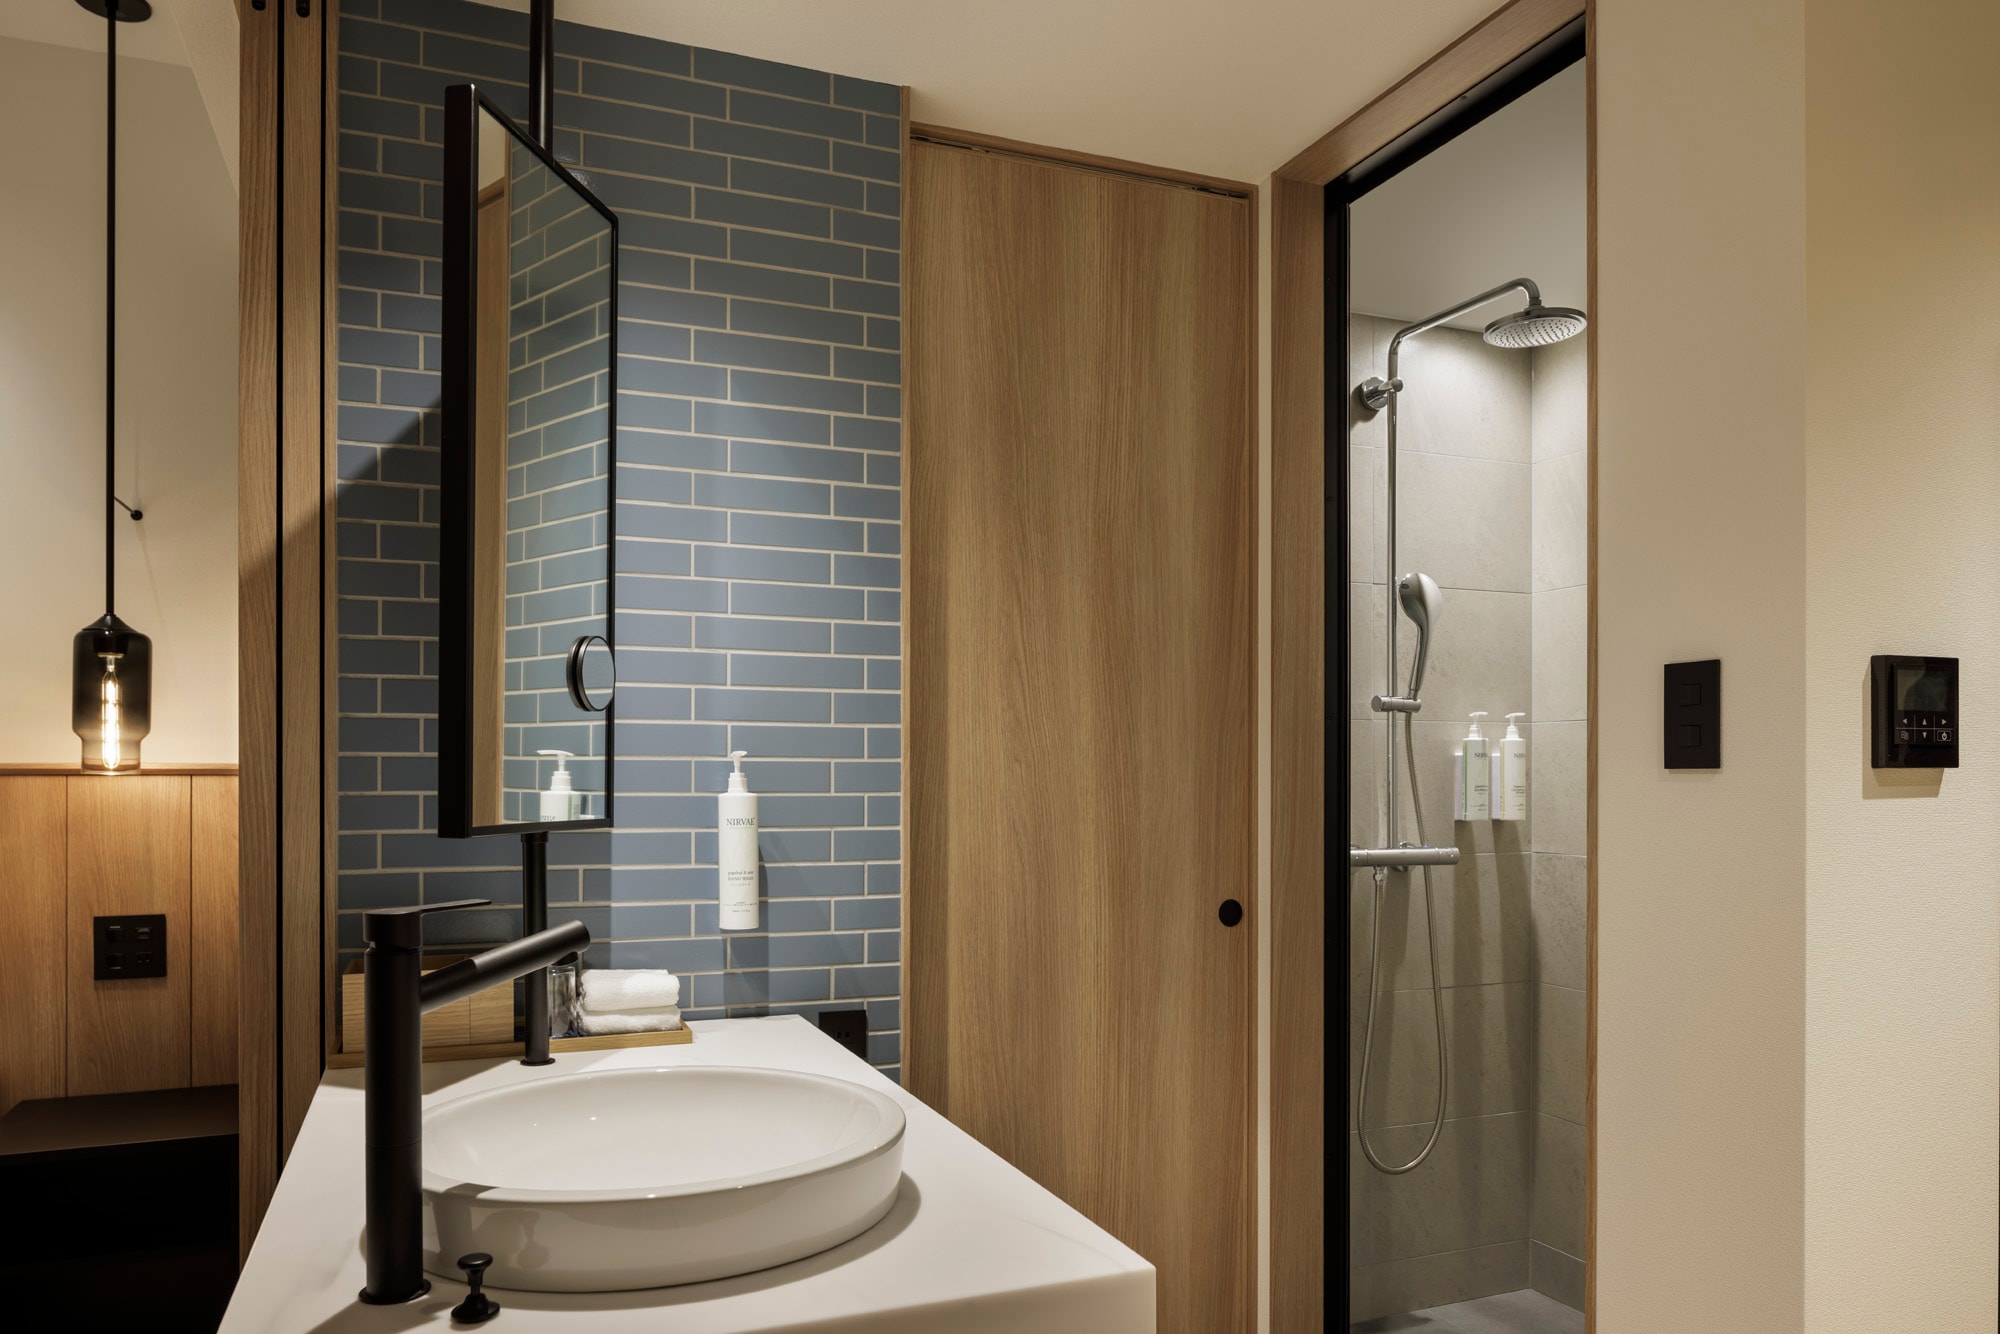 Bathroom: The bath and toilet are separate, so you can use your time effectively when preparing for your morning outing.